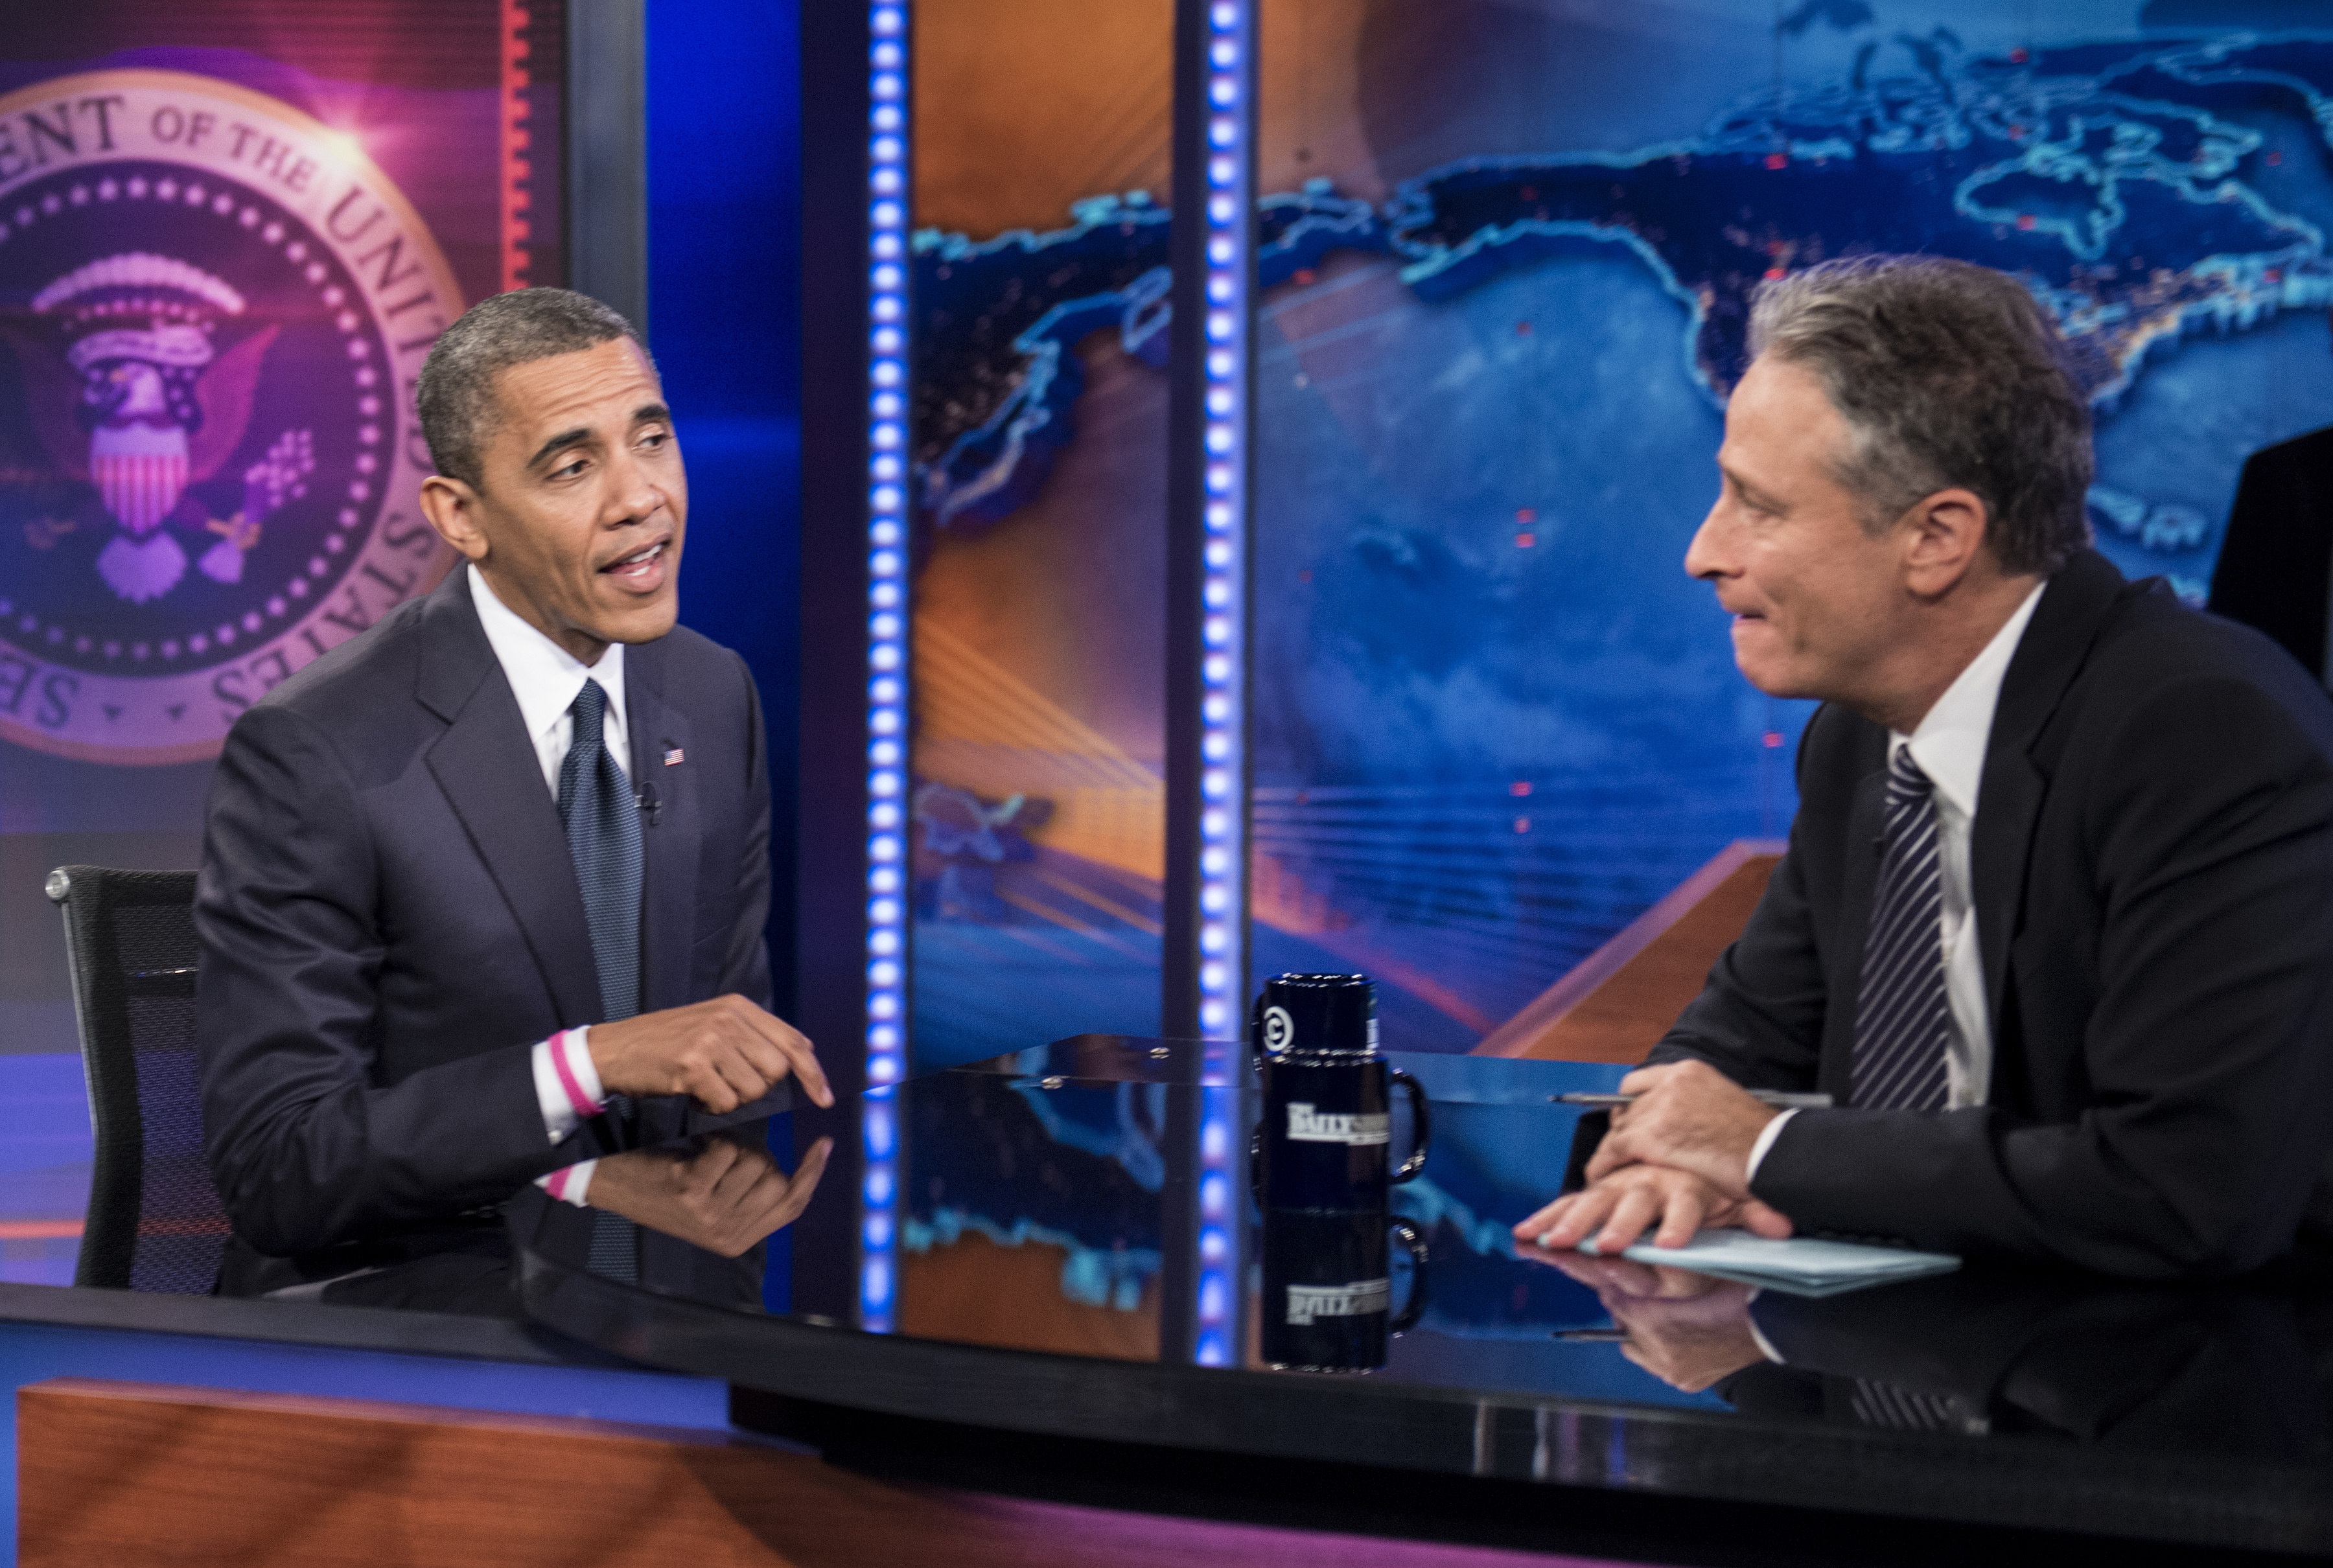 Barack Obama appeared on the show in 2005 as a senator, twice in 2008 as a presidential candidate,  again in 2010 during his fist term, and finally in 2012 as he ran for a second term